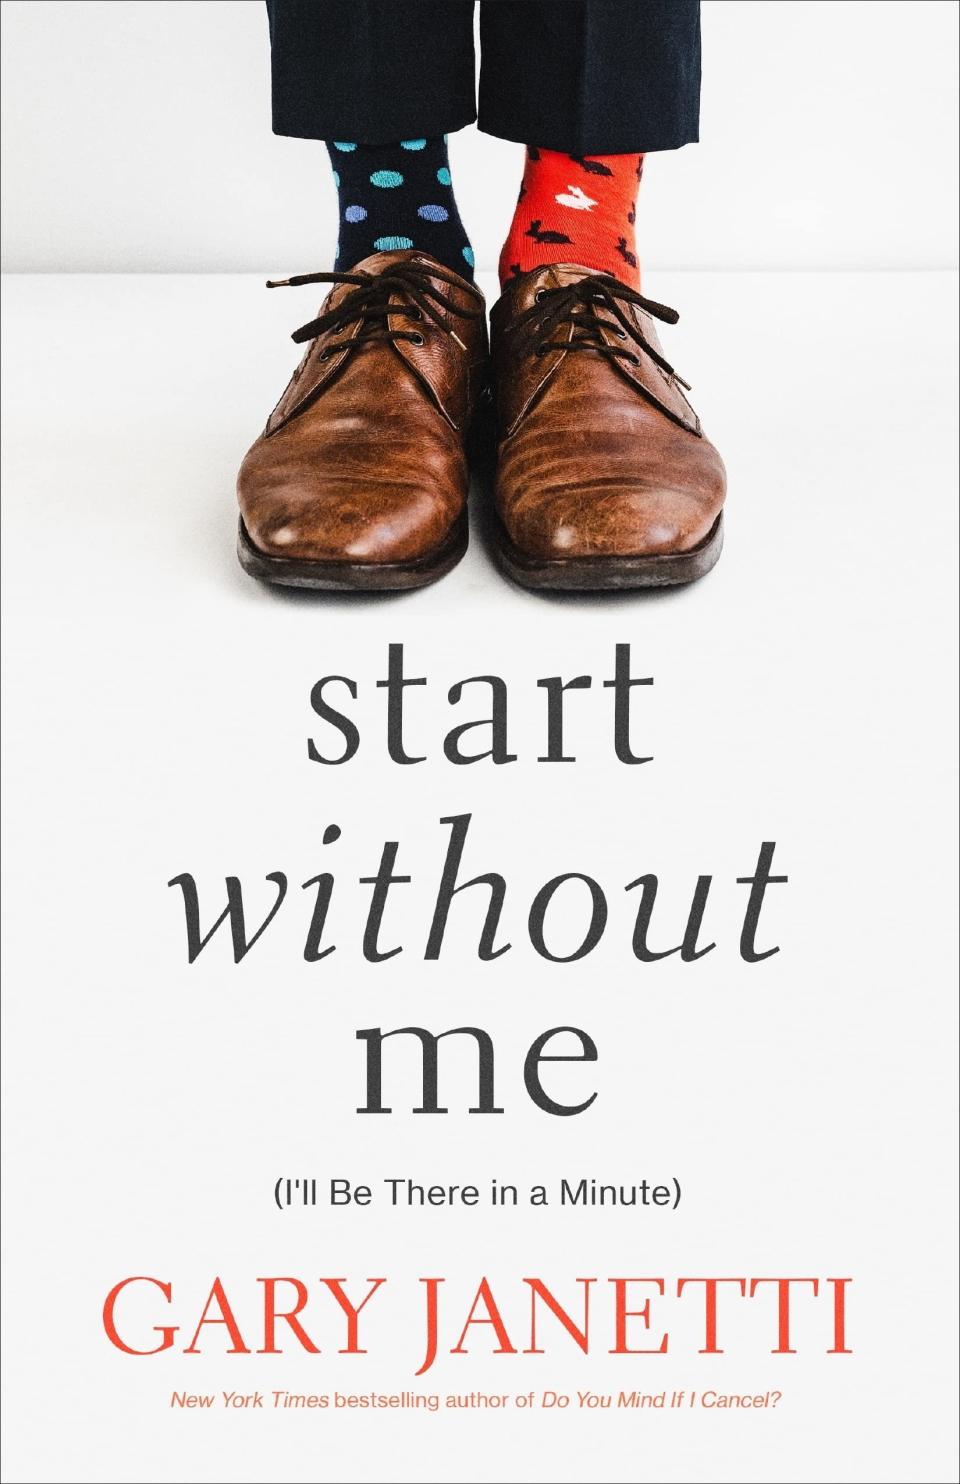 The cover of "Start Without Me" by Gary Janetti